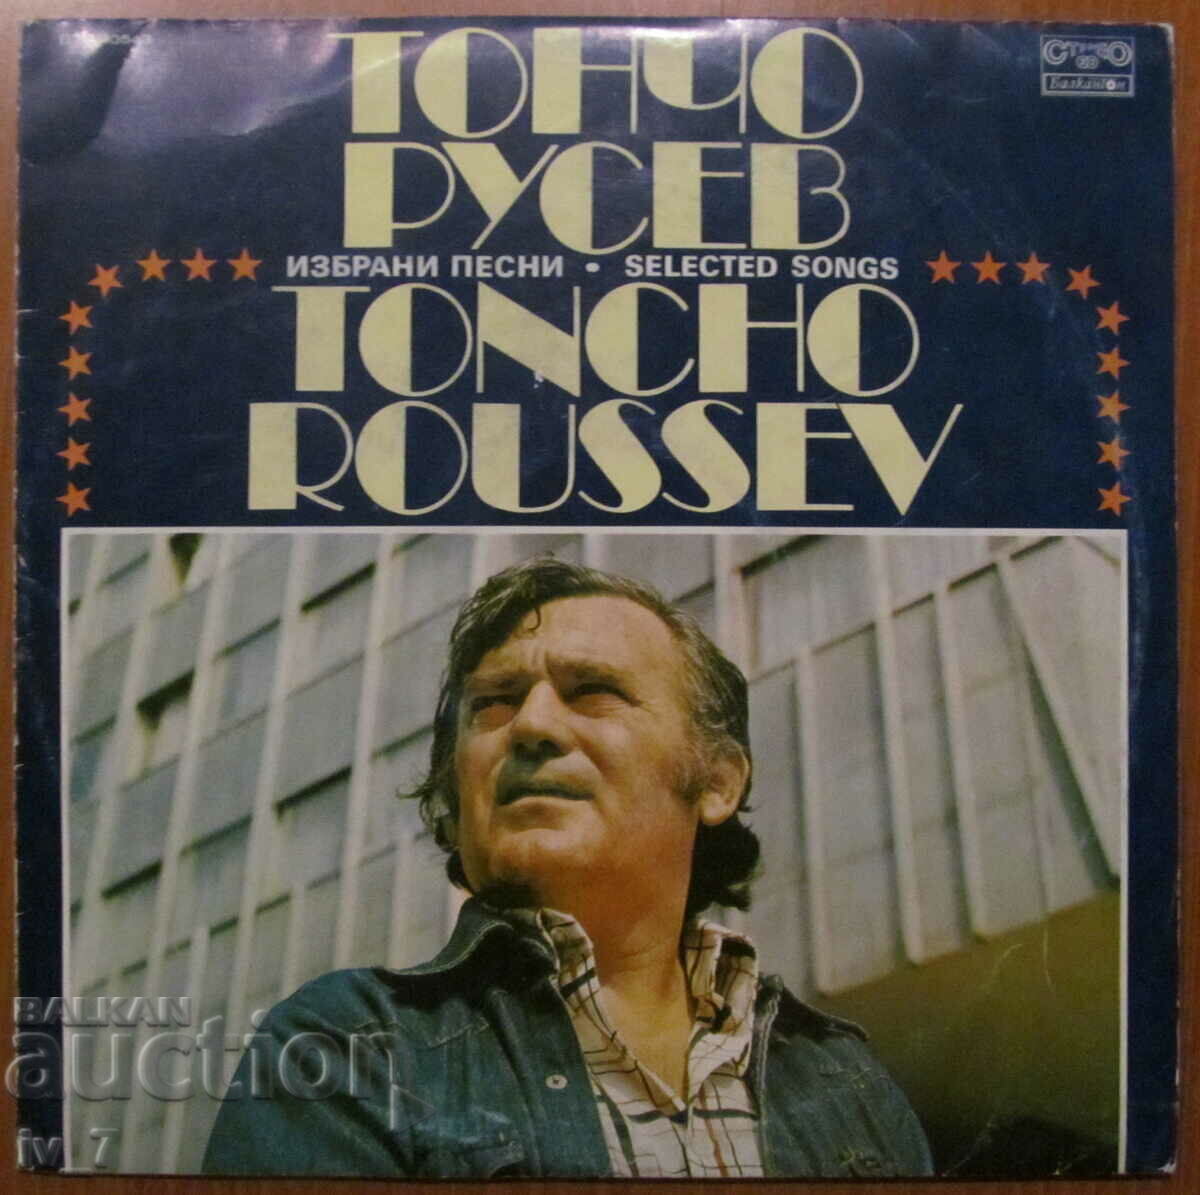 RECORD - TONCHO RUSEV - SELECTED SONGS, large format